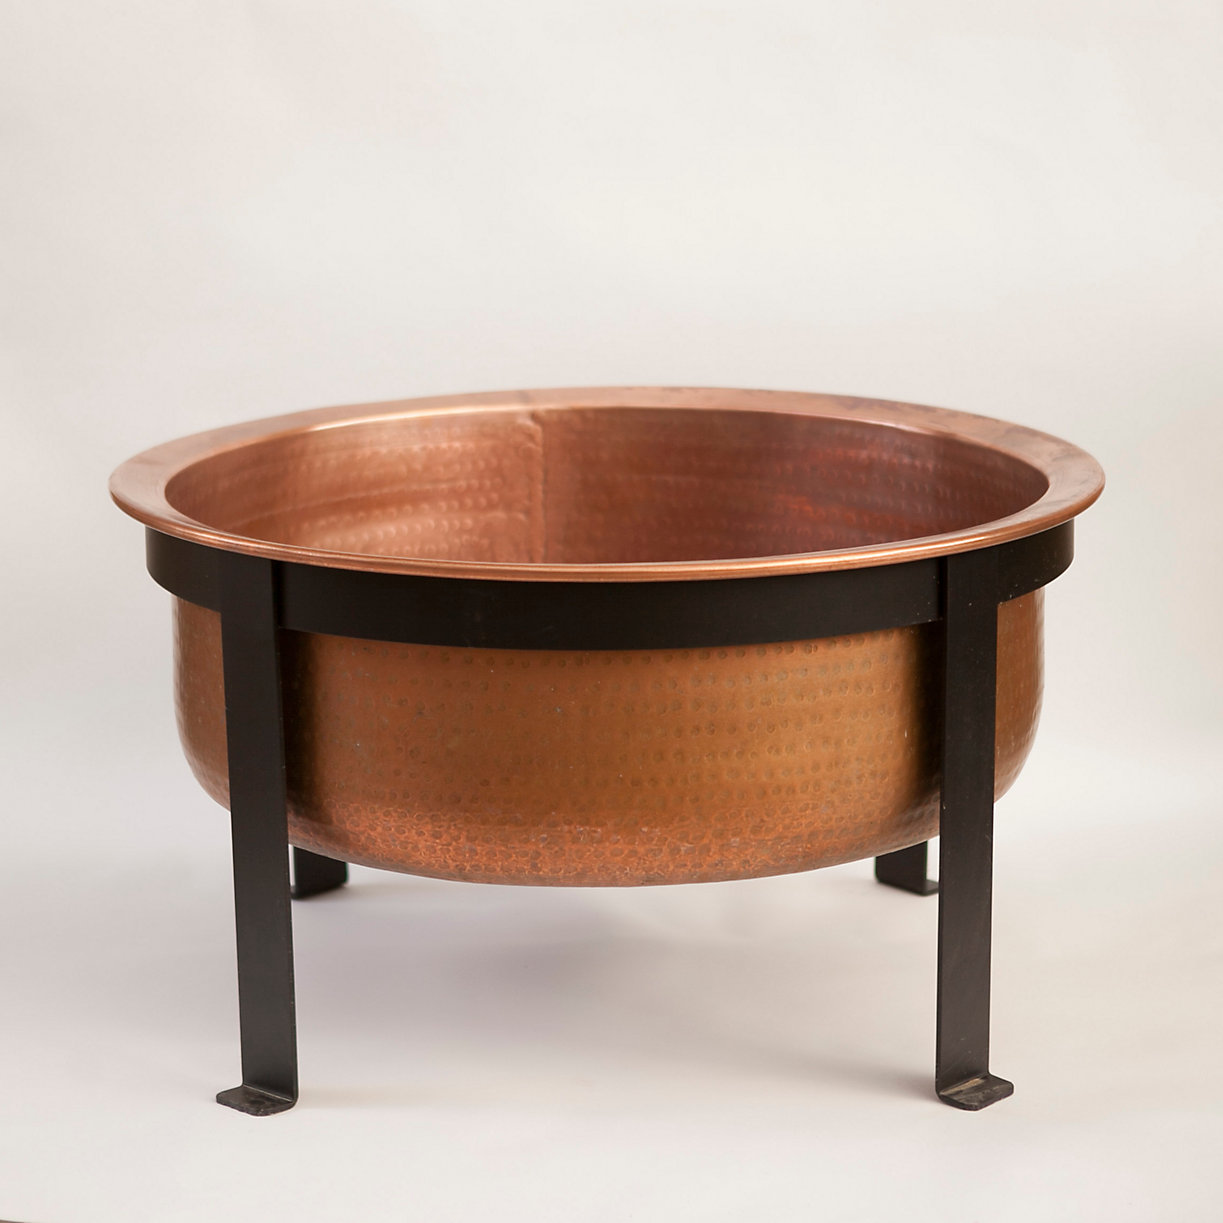 Copper Table Fire Pit Accuweather, Best Copper Fire Pit